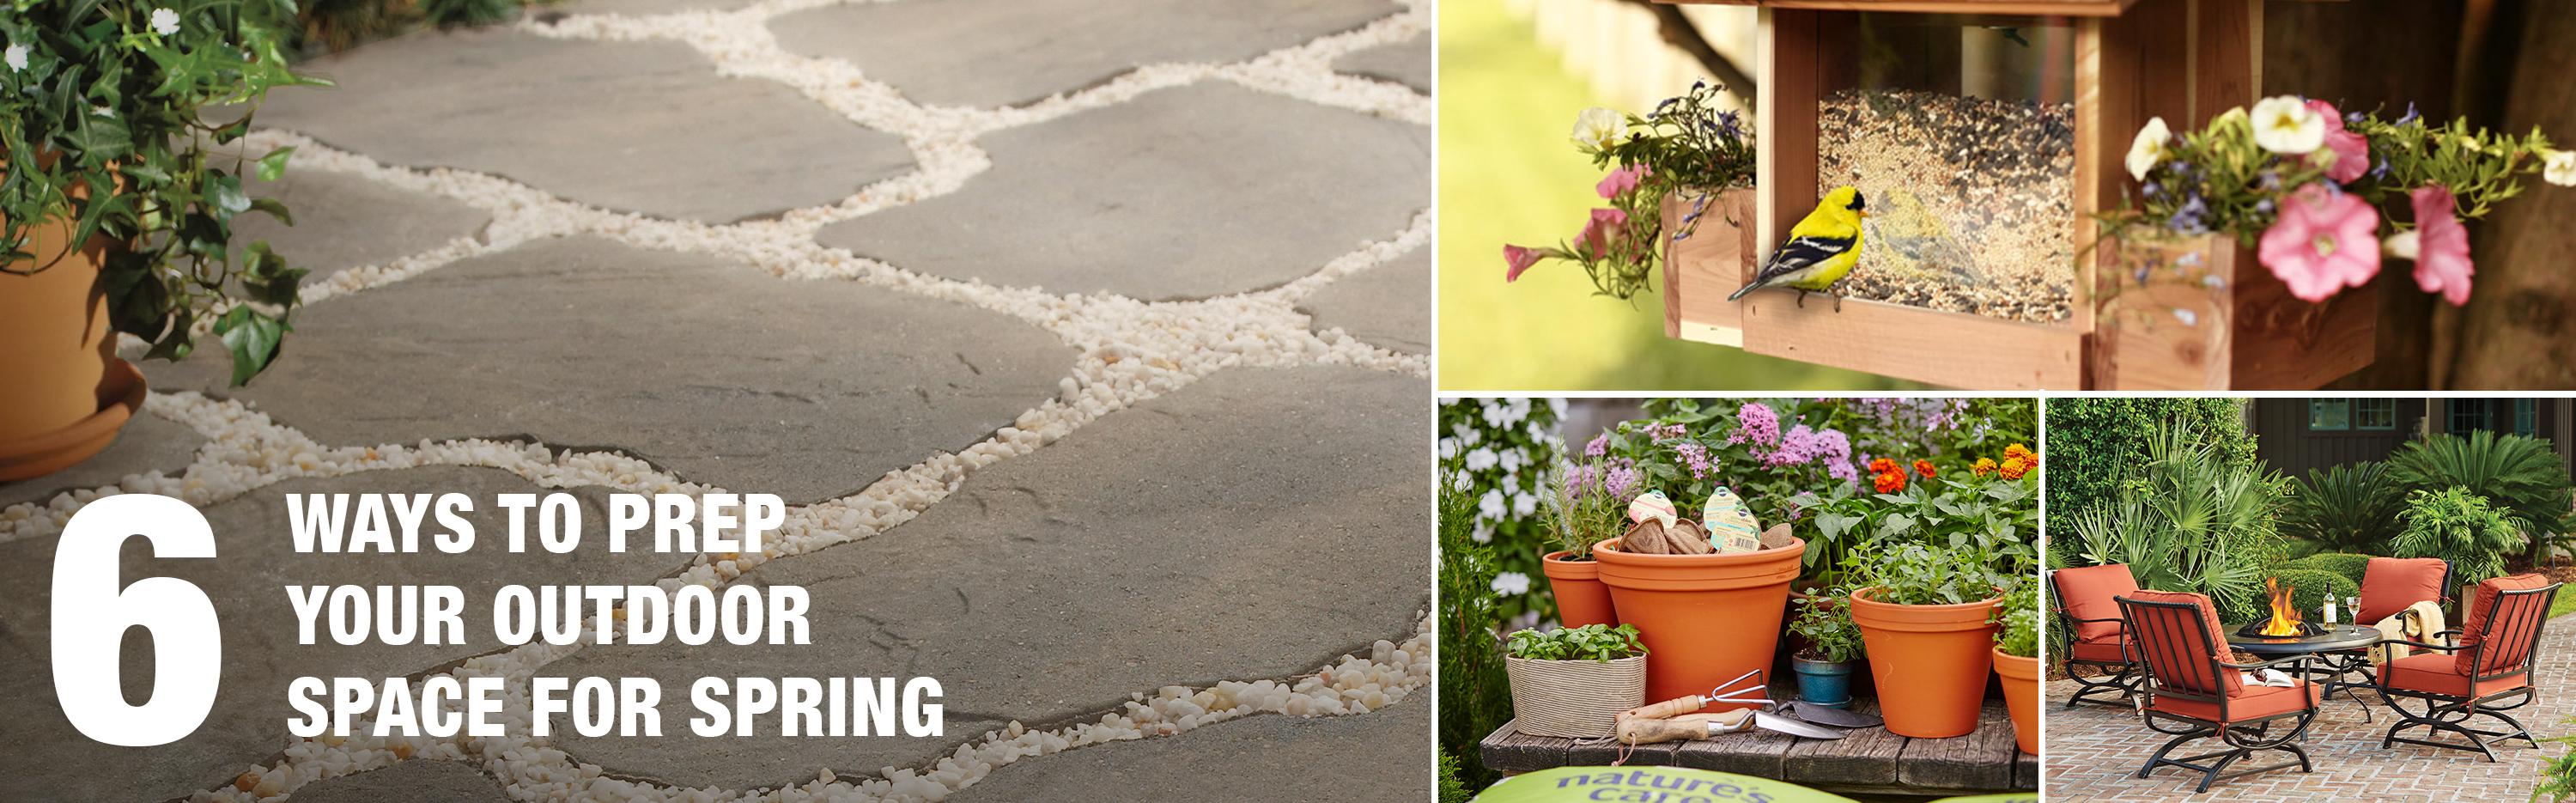 Preparing your outdoor space for spring